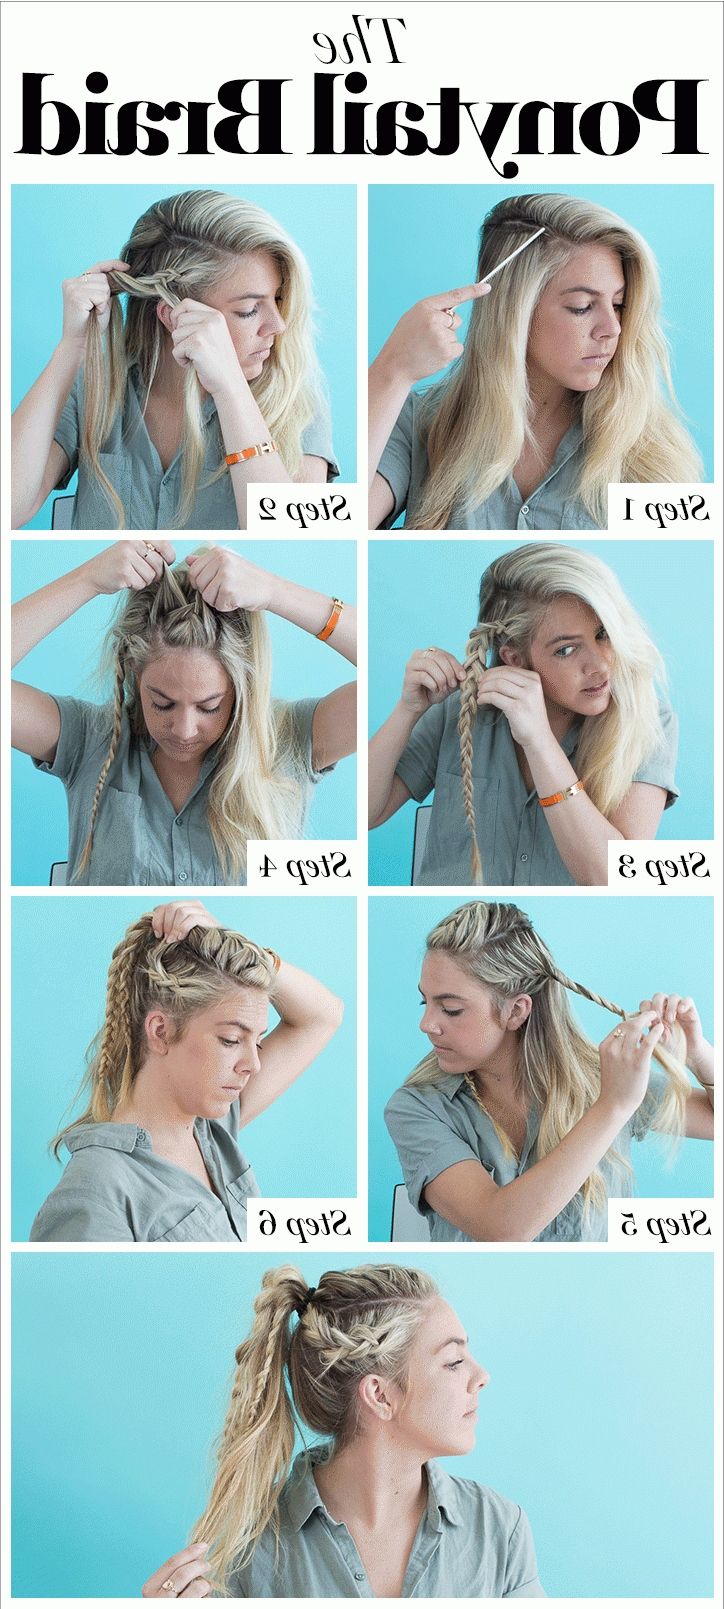 2018 Pony Hairstyles With Wrap Around Braid For Short Hair Inside How To Braid Hair: 8 Cute Diy Hairstyles For Every Hair Type (View 5 of 20)